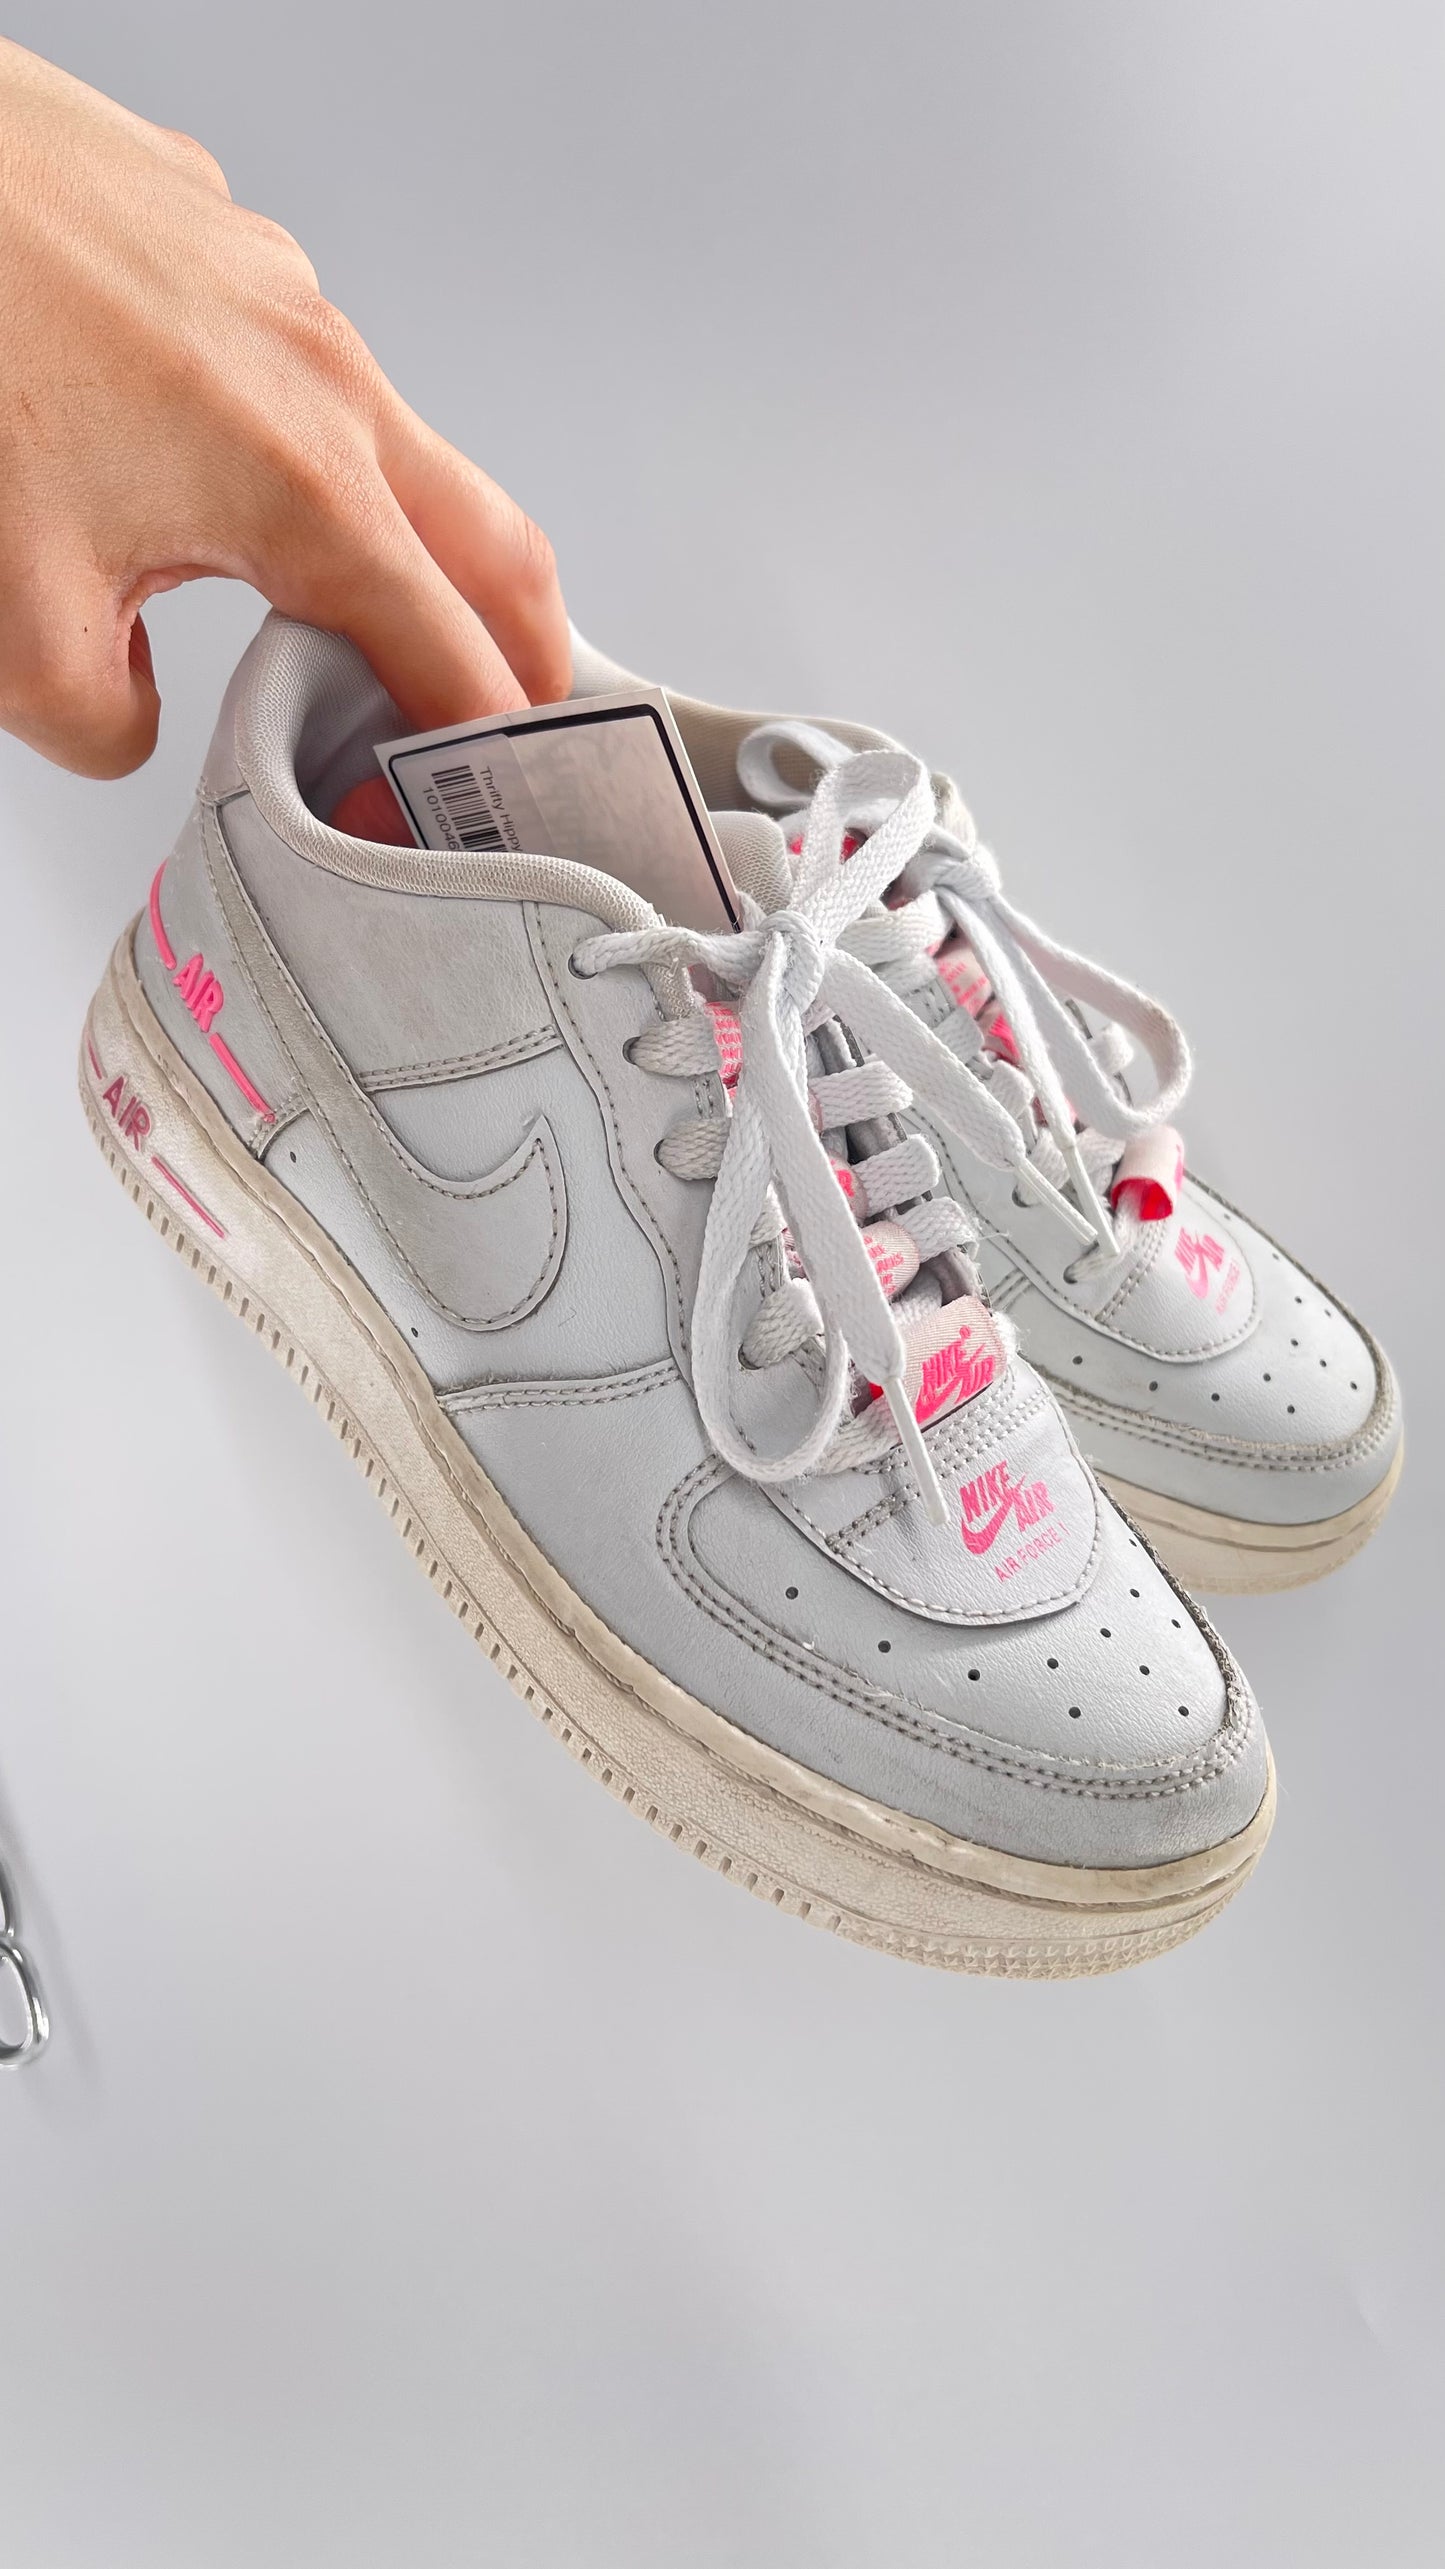 Custom Nikes Worn White with Tags on Laces and Neon Pink Details (4Y)